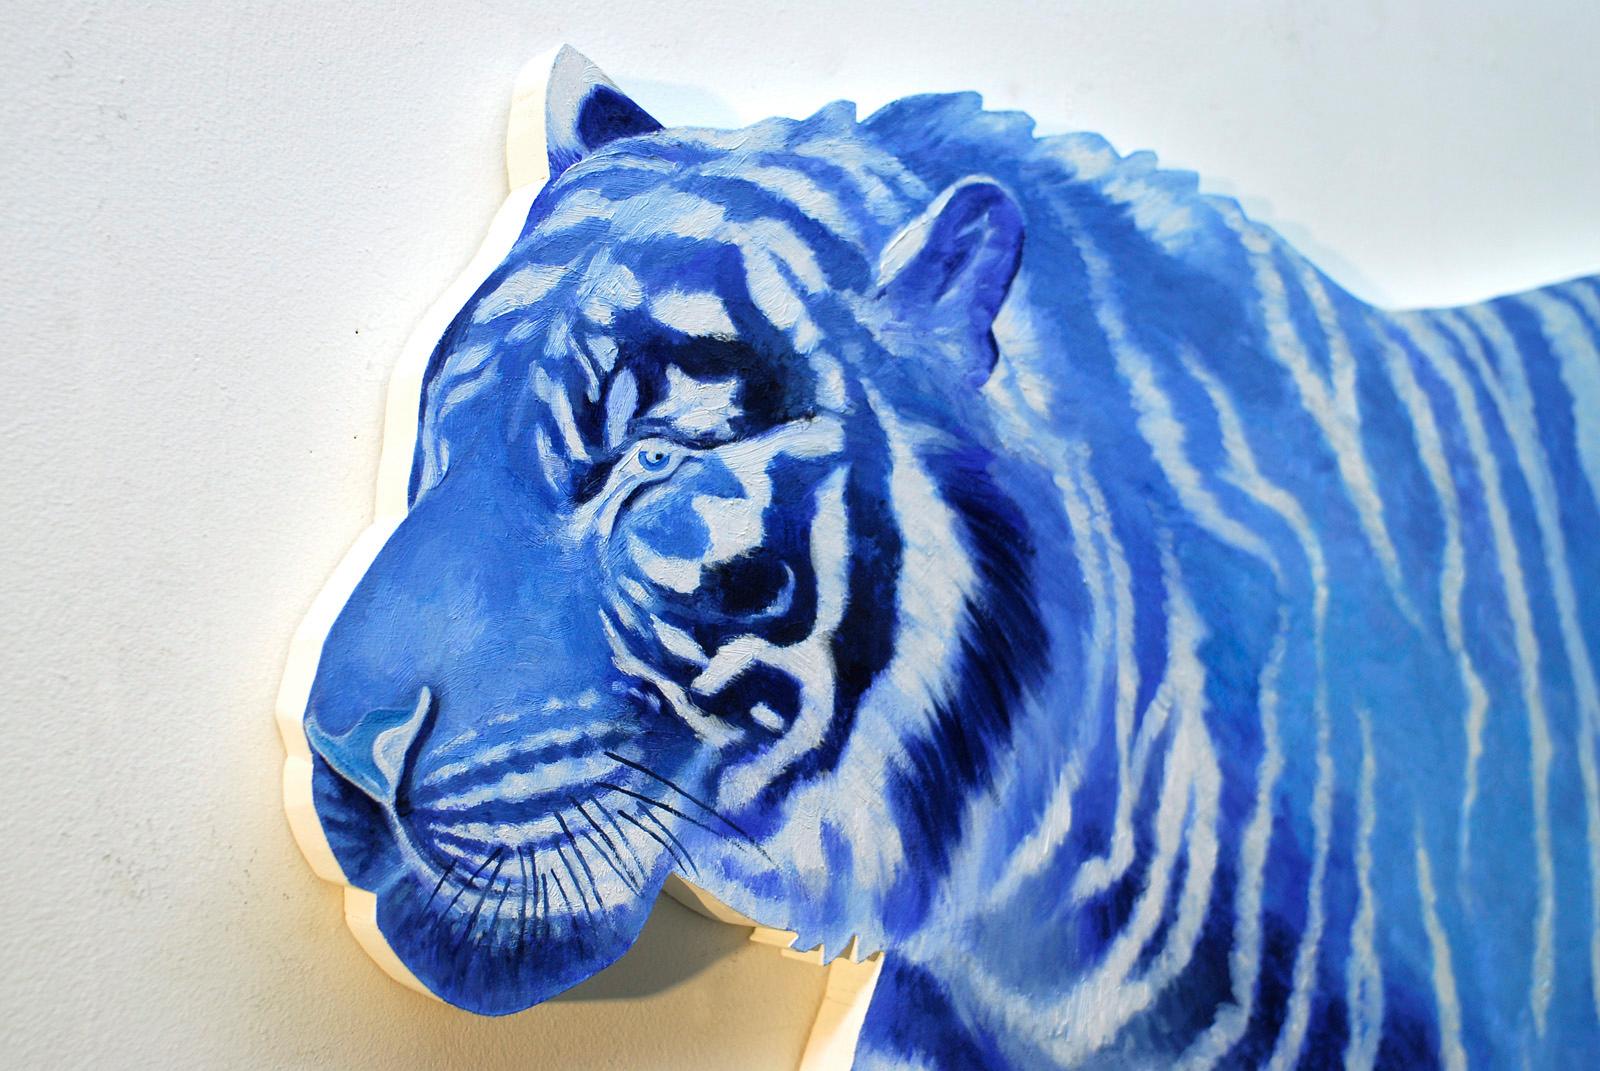 Bengal Tiger, oil on cut out wood panel, blue & white striped figurative, animal - Painting by Alexis Kandra